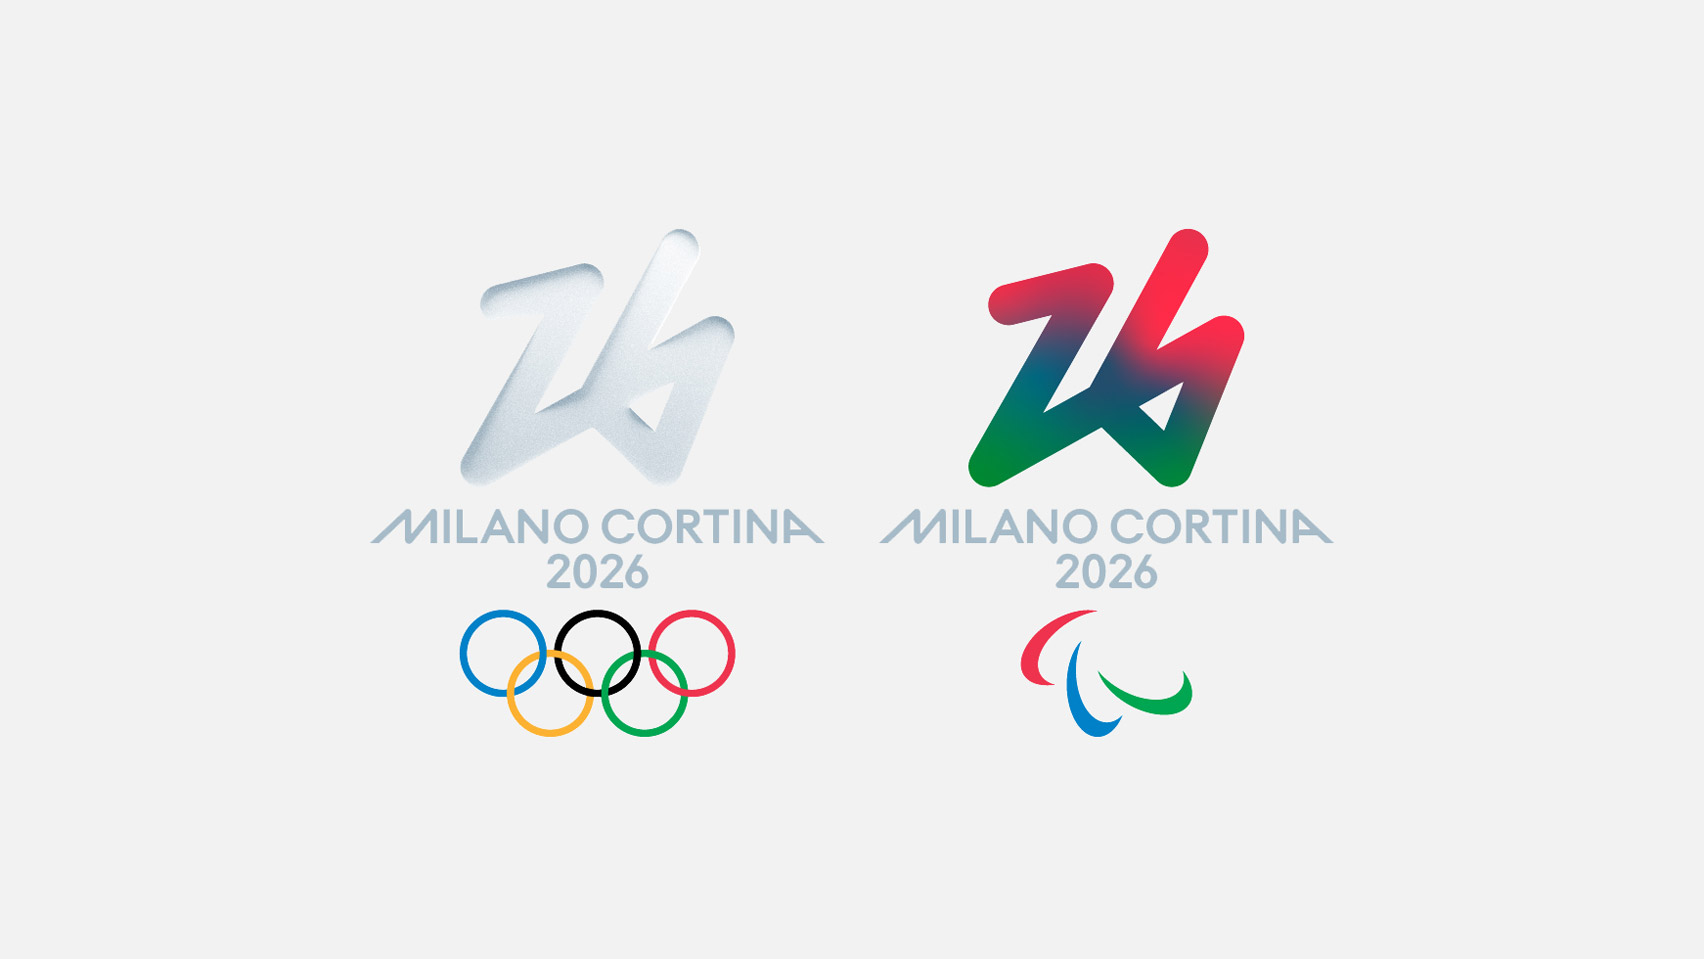 Milan Cortina 2026 claims losses of €21.2 million much lower than forecast